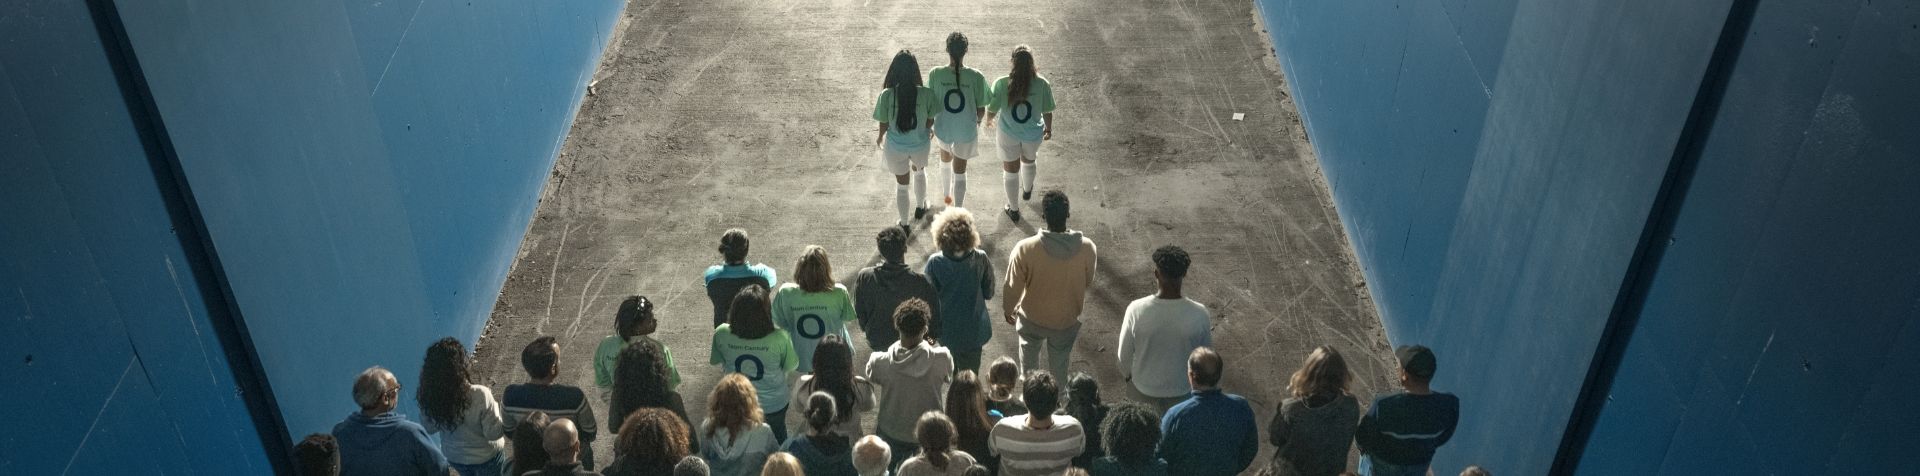 Bird’s eye view from behind a group of football fans walking through a corridor leading to the pitch. Three female footballers with long hair wearing green Team Century shirts with a blue number 0 on the back and white shorts and football socks and shoes are leading the group by a few steps.